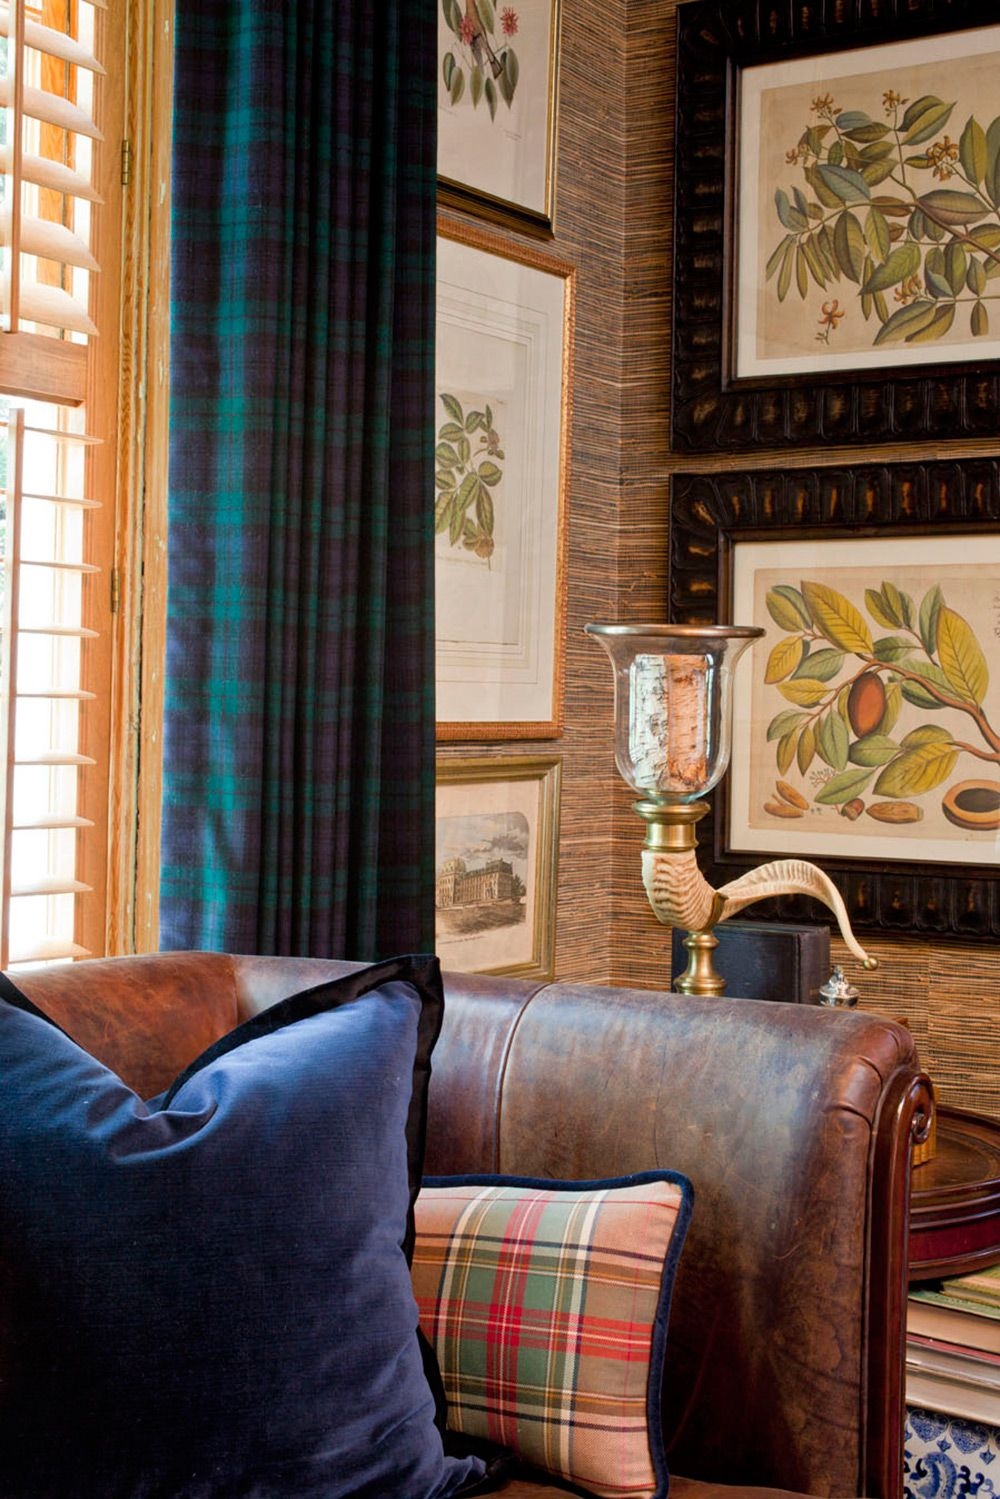 I love this look tartan old leather chesterfield botanical prints